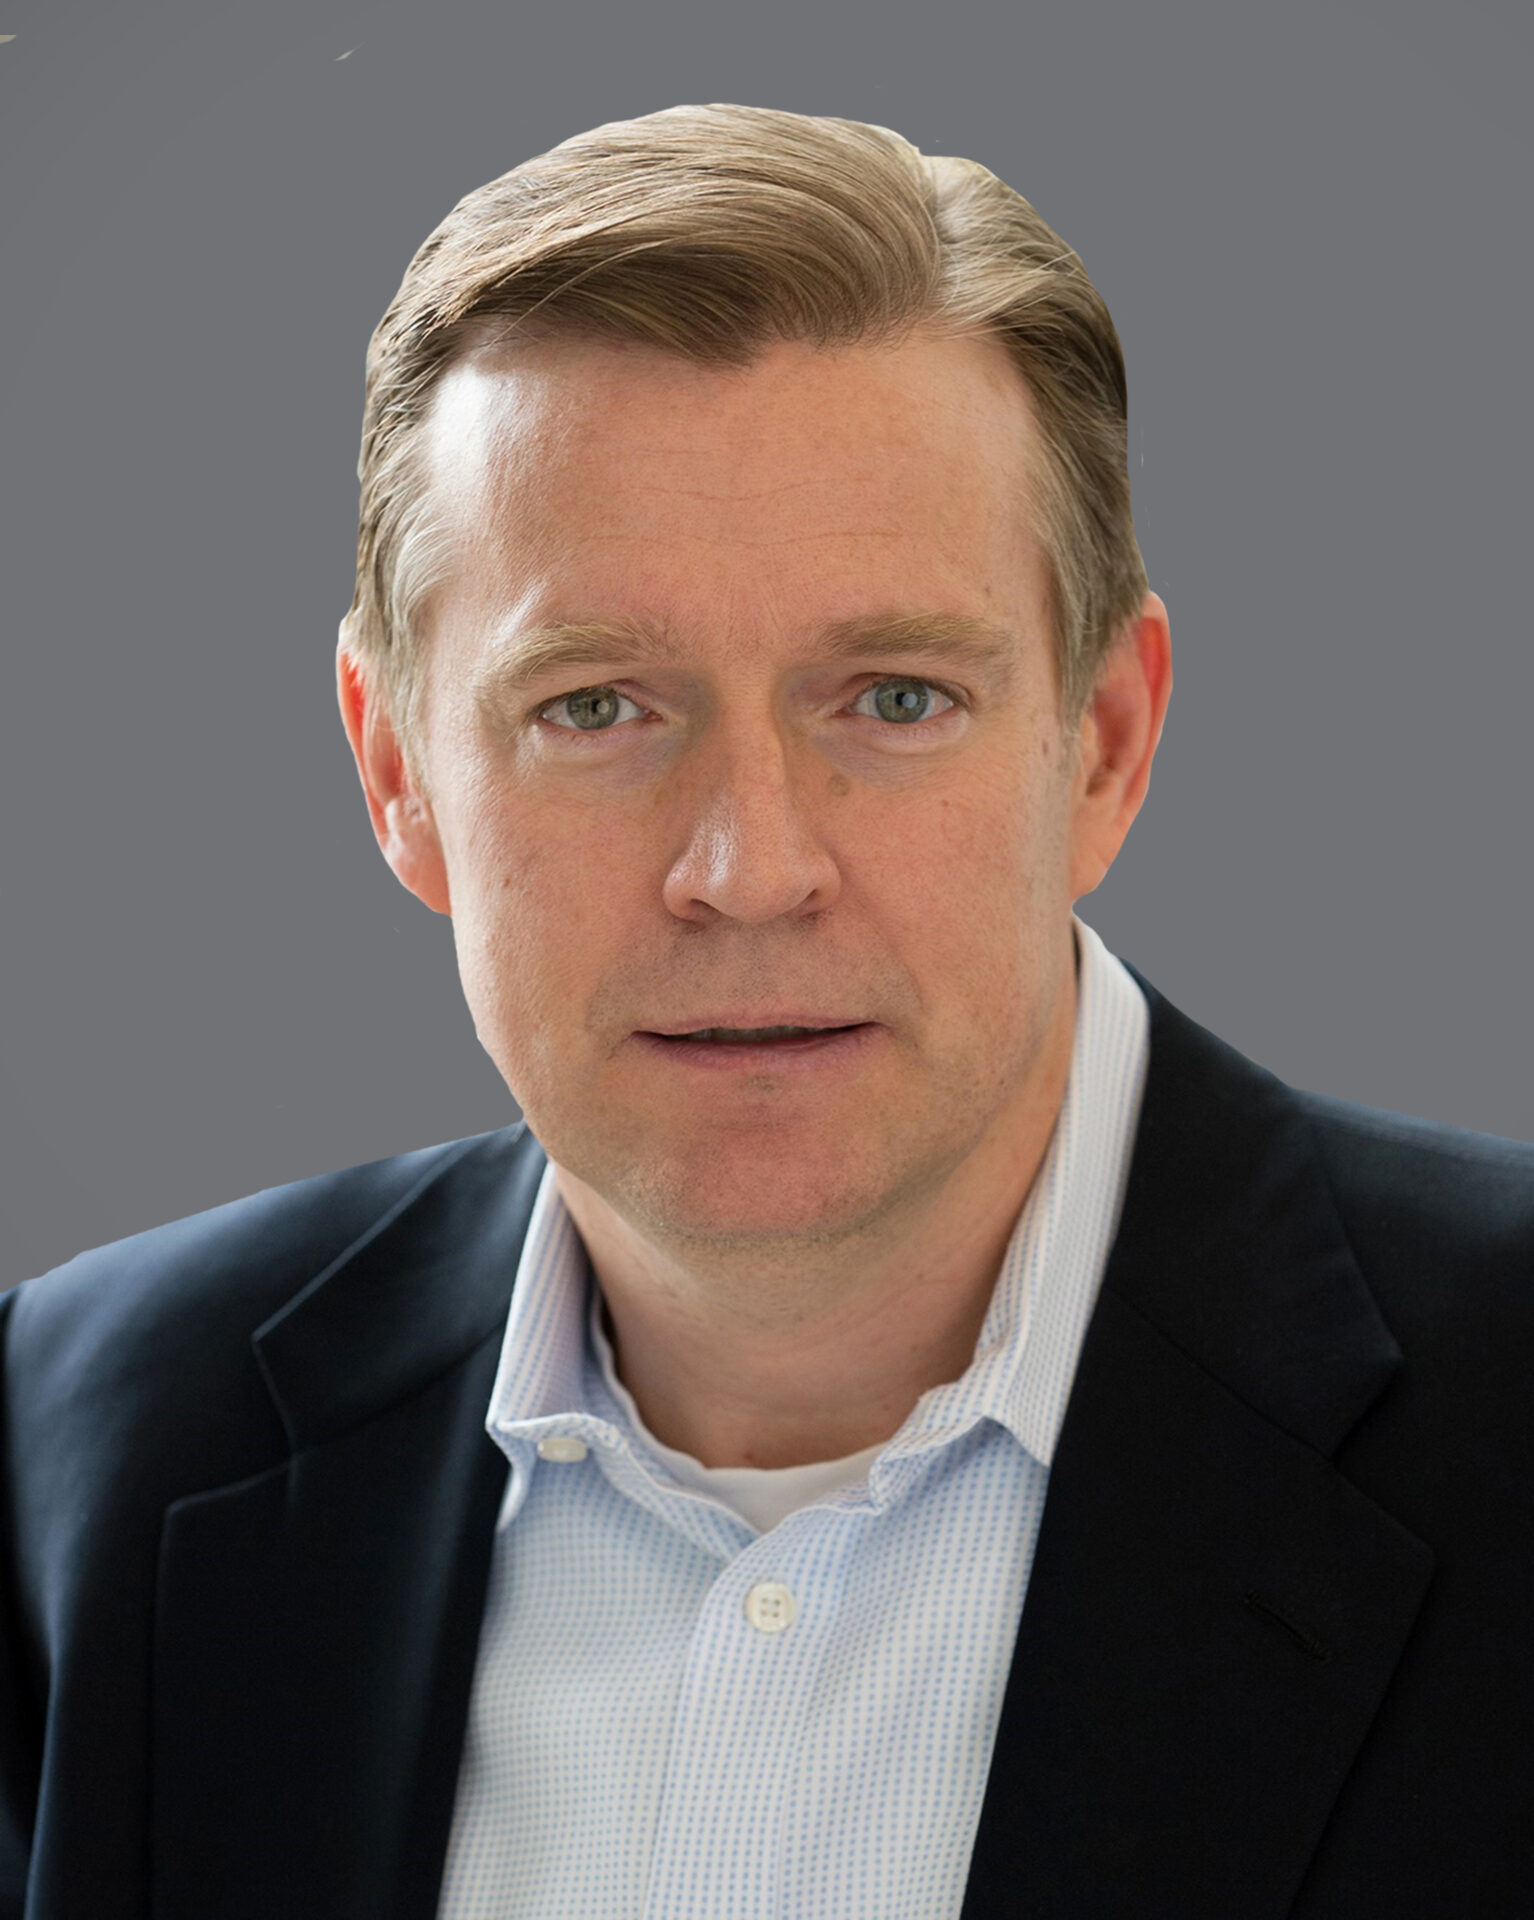 Headshot of Mike Dudrear, Newcleus' Chief Finance Officer